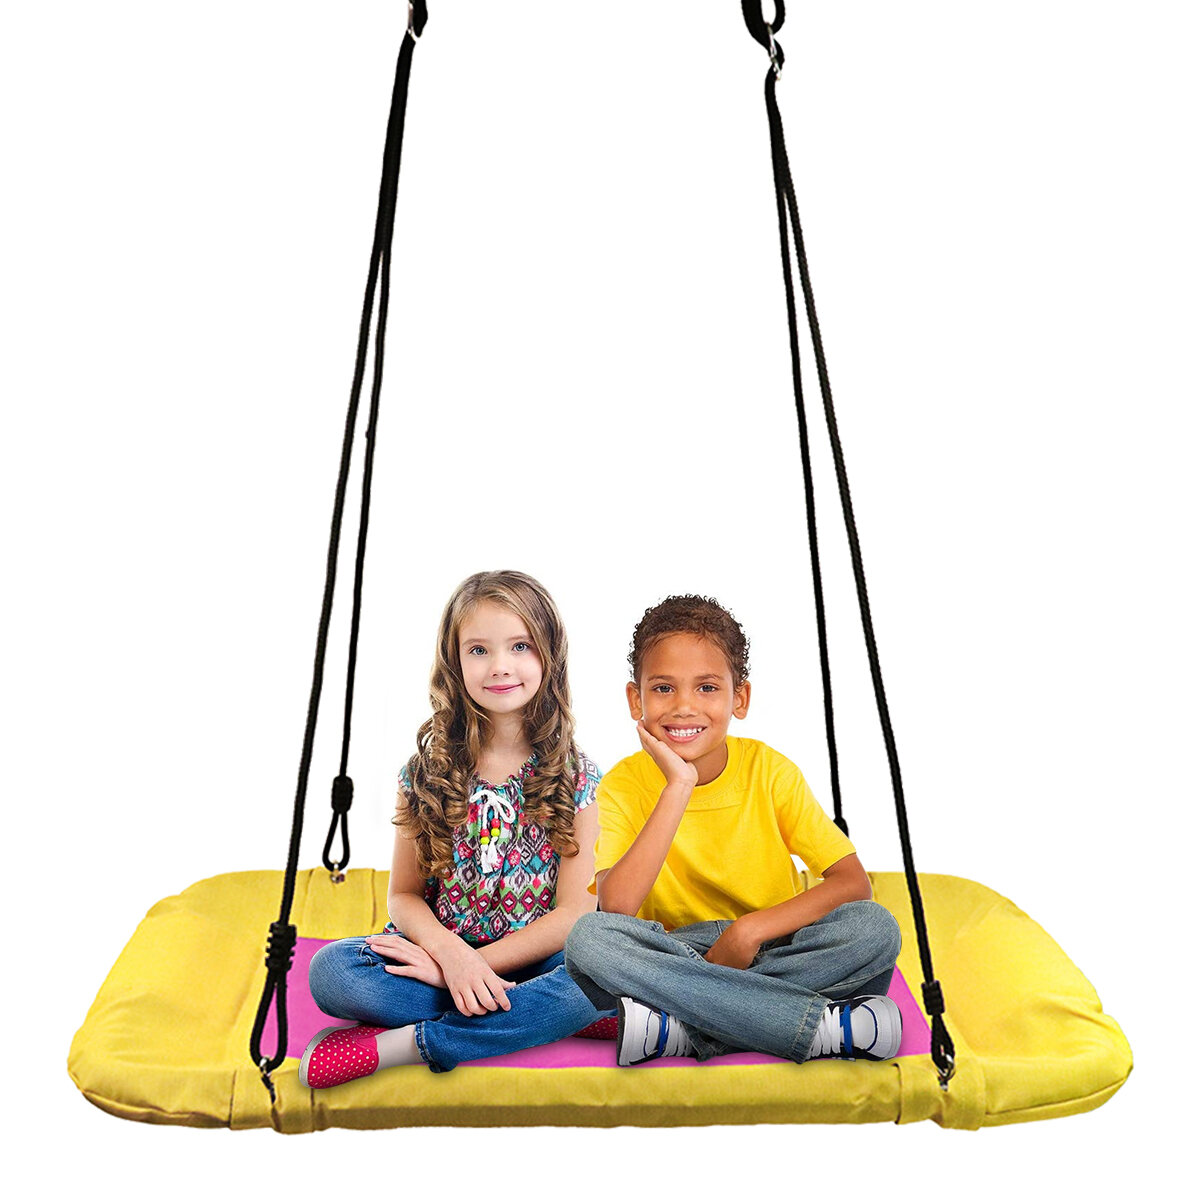 45'' Square Swing Adjustable Height PE Rope Hanging Seat Hammock Max Load 330lbs Outdoor Garden Patio